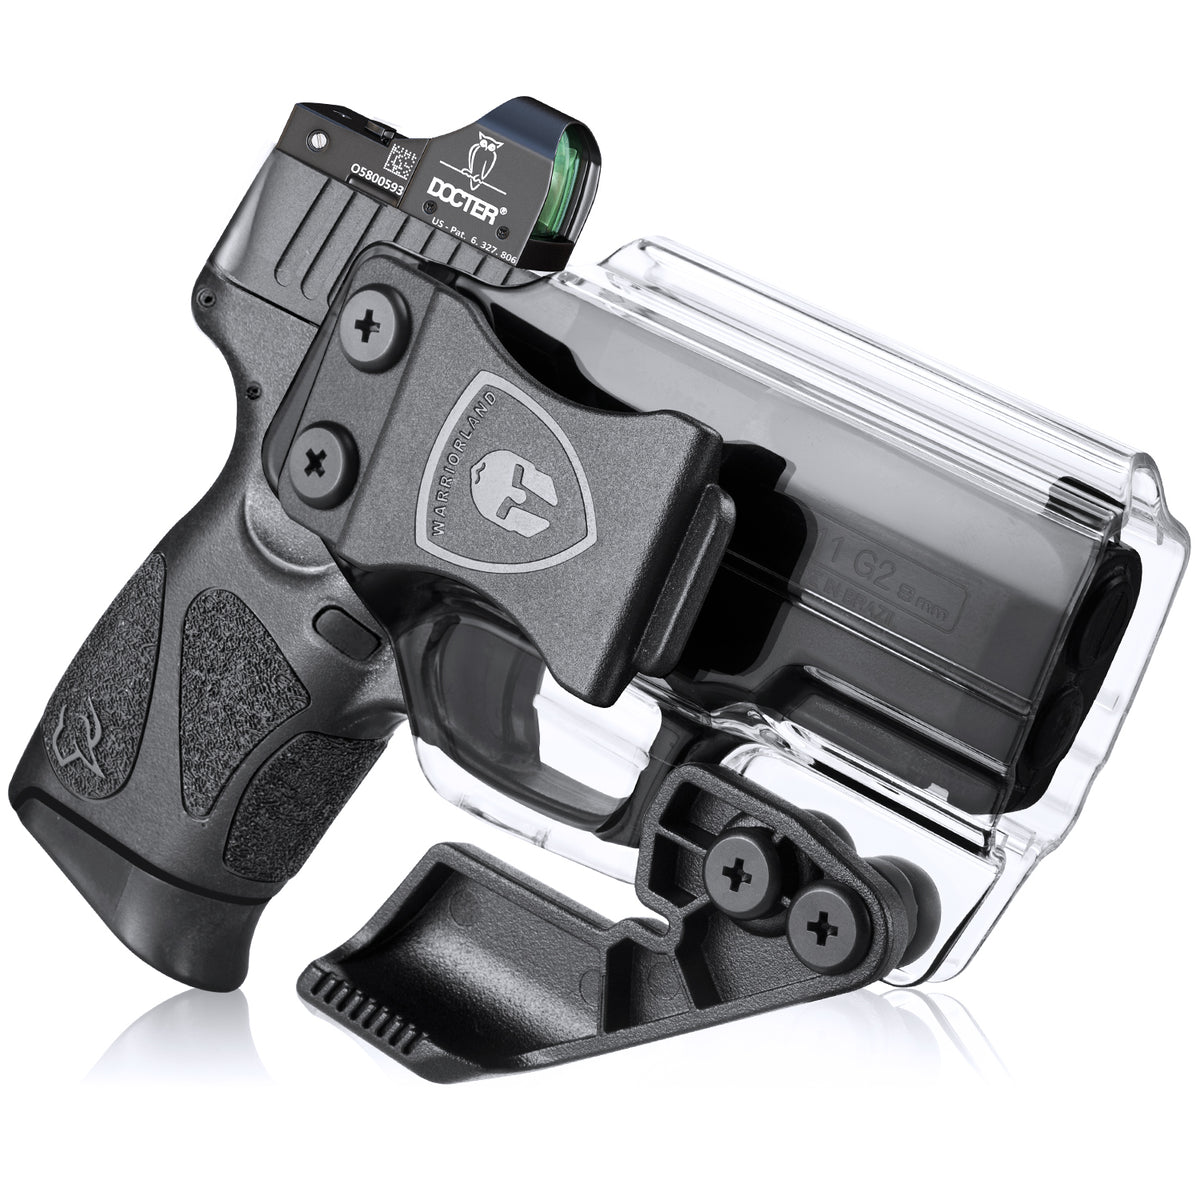 Clear Taurus G2C / G3C / Millennium PT111 G2 / PT140 Pistol Inside Waistband Concealed Carry Holster with Claw Red Dot Optics Sight | WARRIORLAND